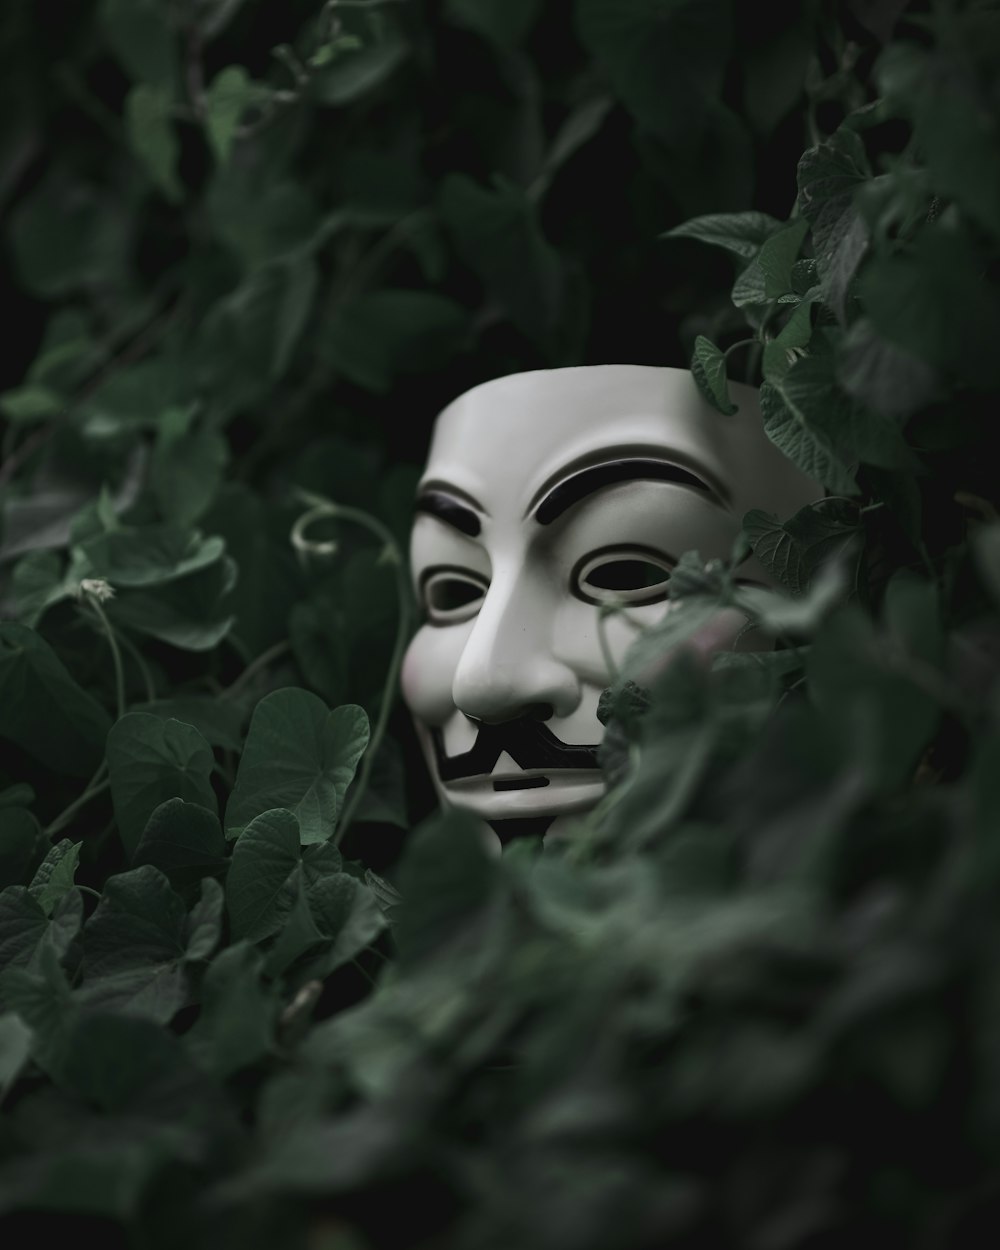 selective focus short of Guy Fawkes mask hiding behind plants